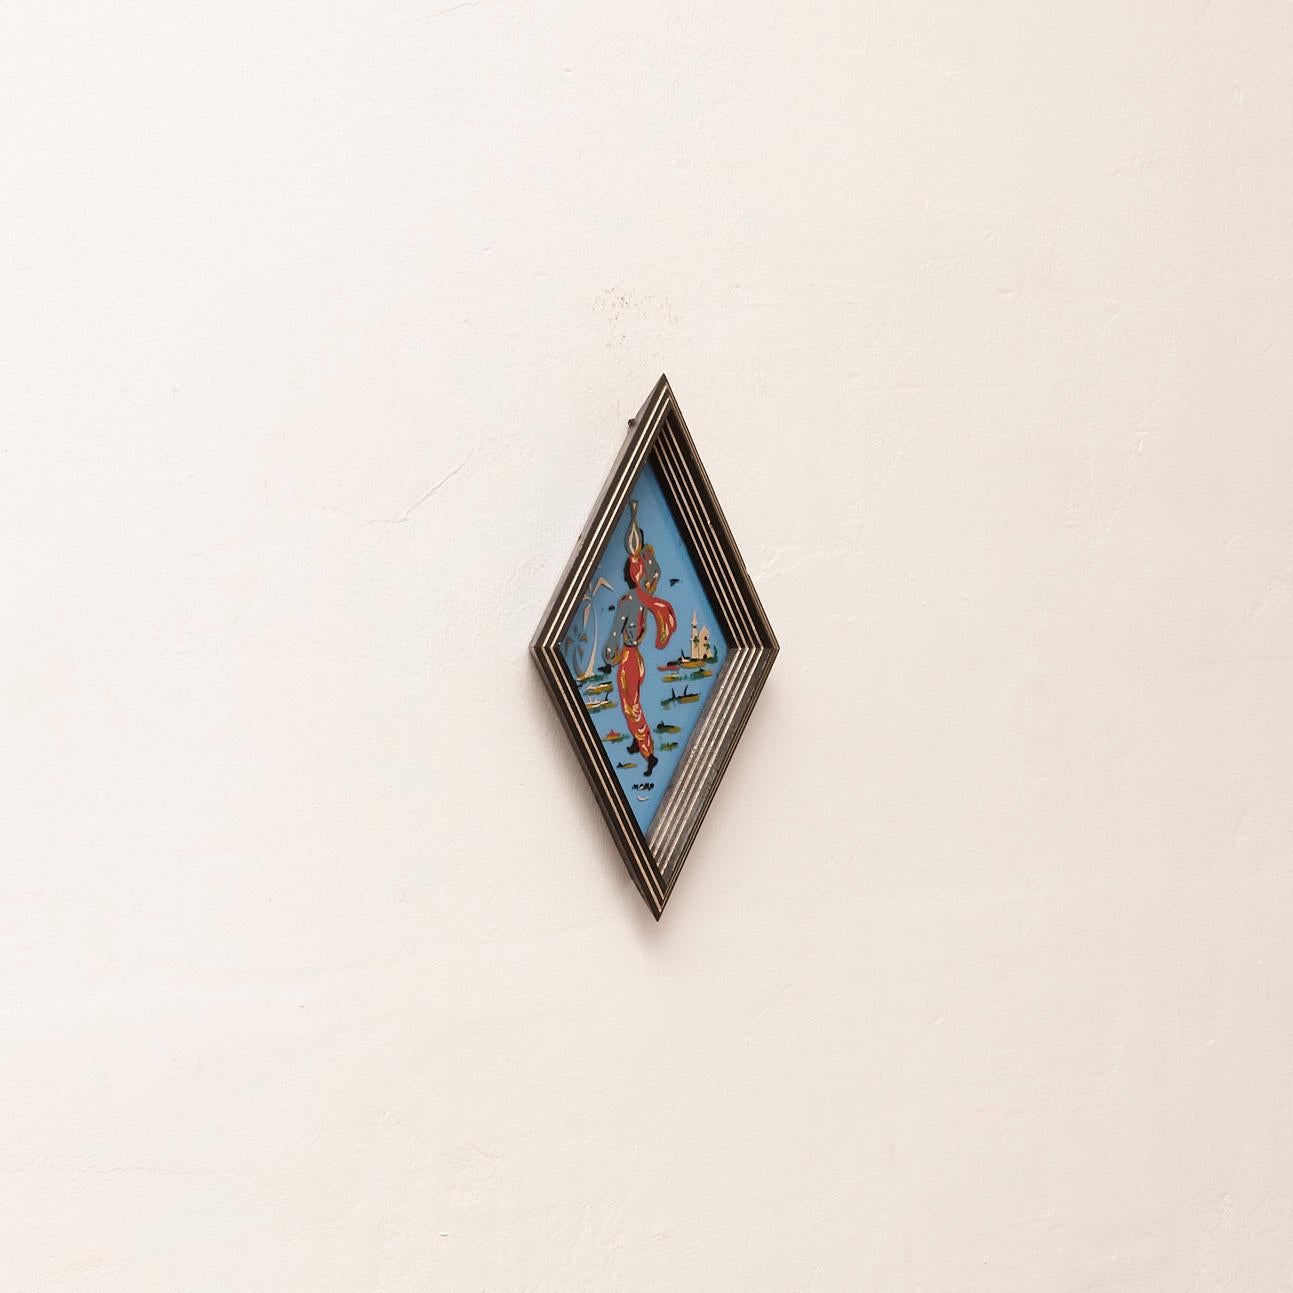 Framed Blue Glass Hand Painted, circa 1950
Manufactured France, circa 1950.

Materials:
Wood, glass.

Dimensions: 
D 4 cm x W 23,2 cm x H 38 cm

The artwork is in its original condition, showing minor signs of wear consistent with its age and use.